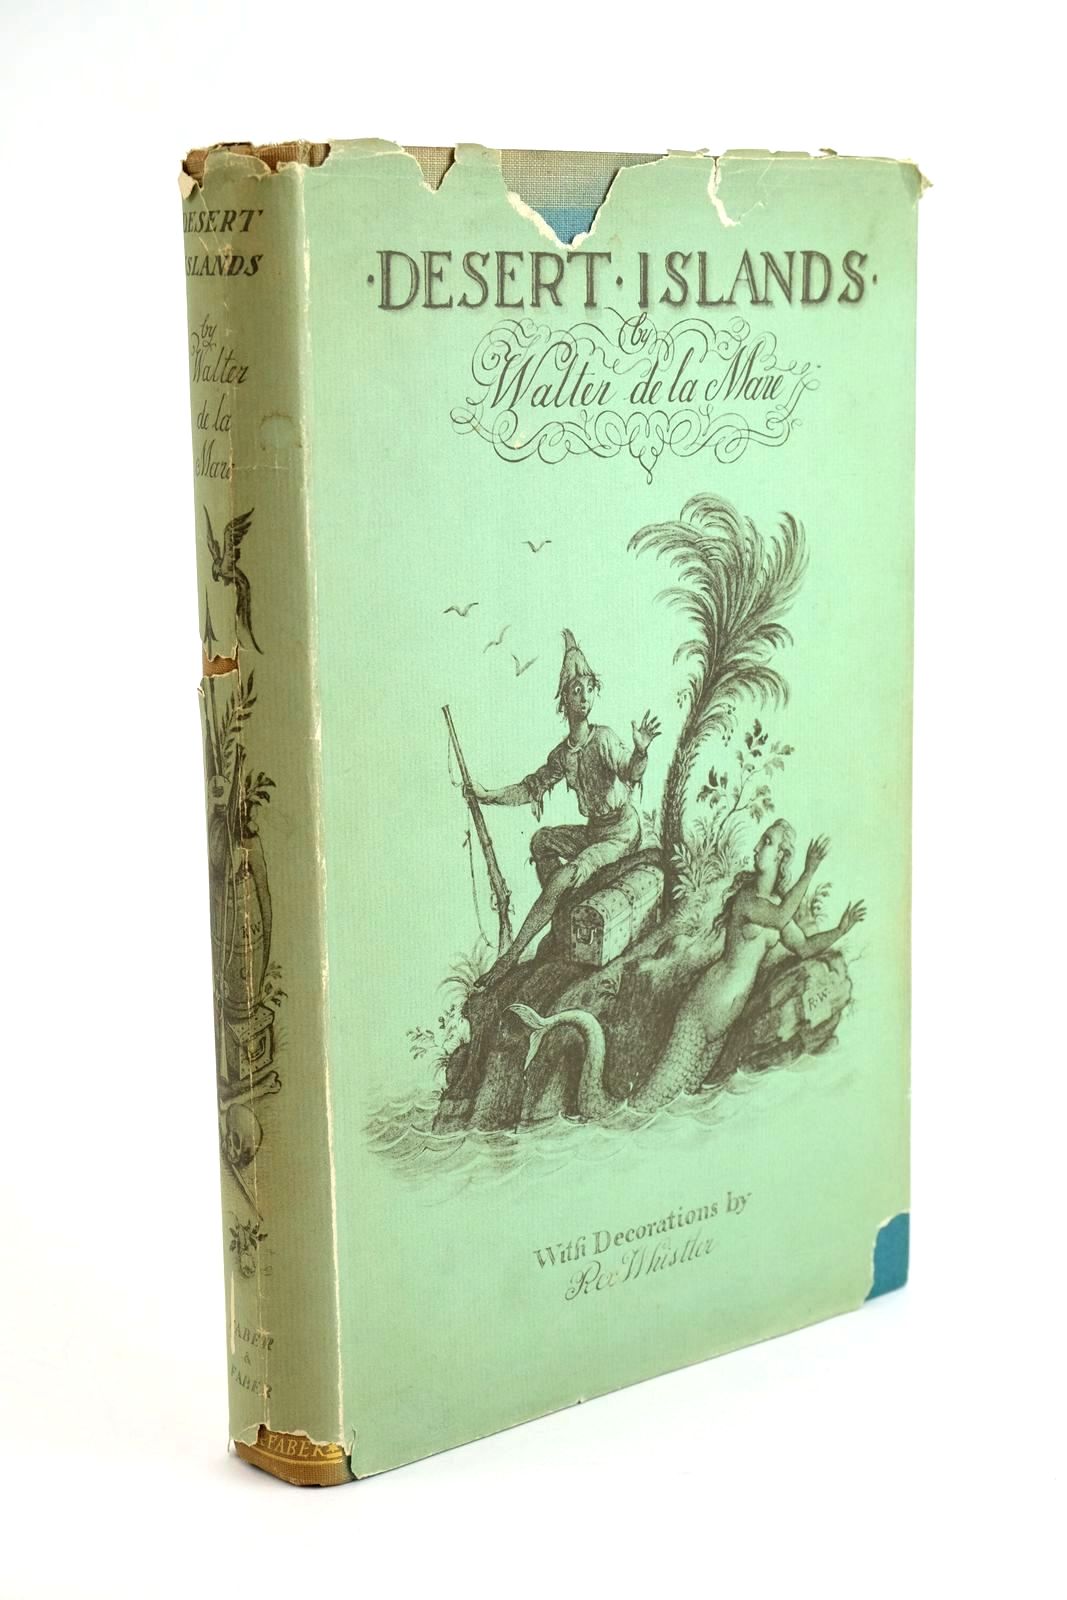 Photo of DESERT ISLANDS AND ROBINSON CRUSOE- Stock Number: 1323483